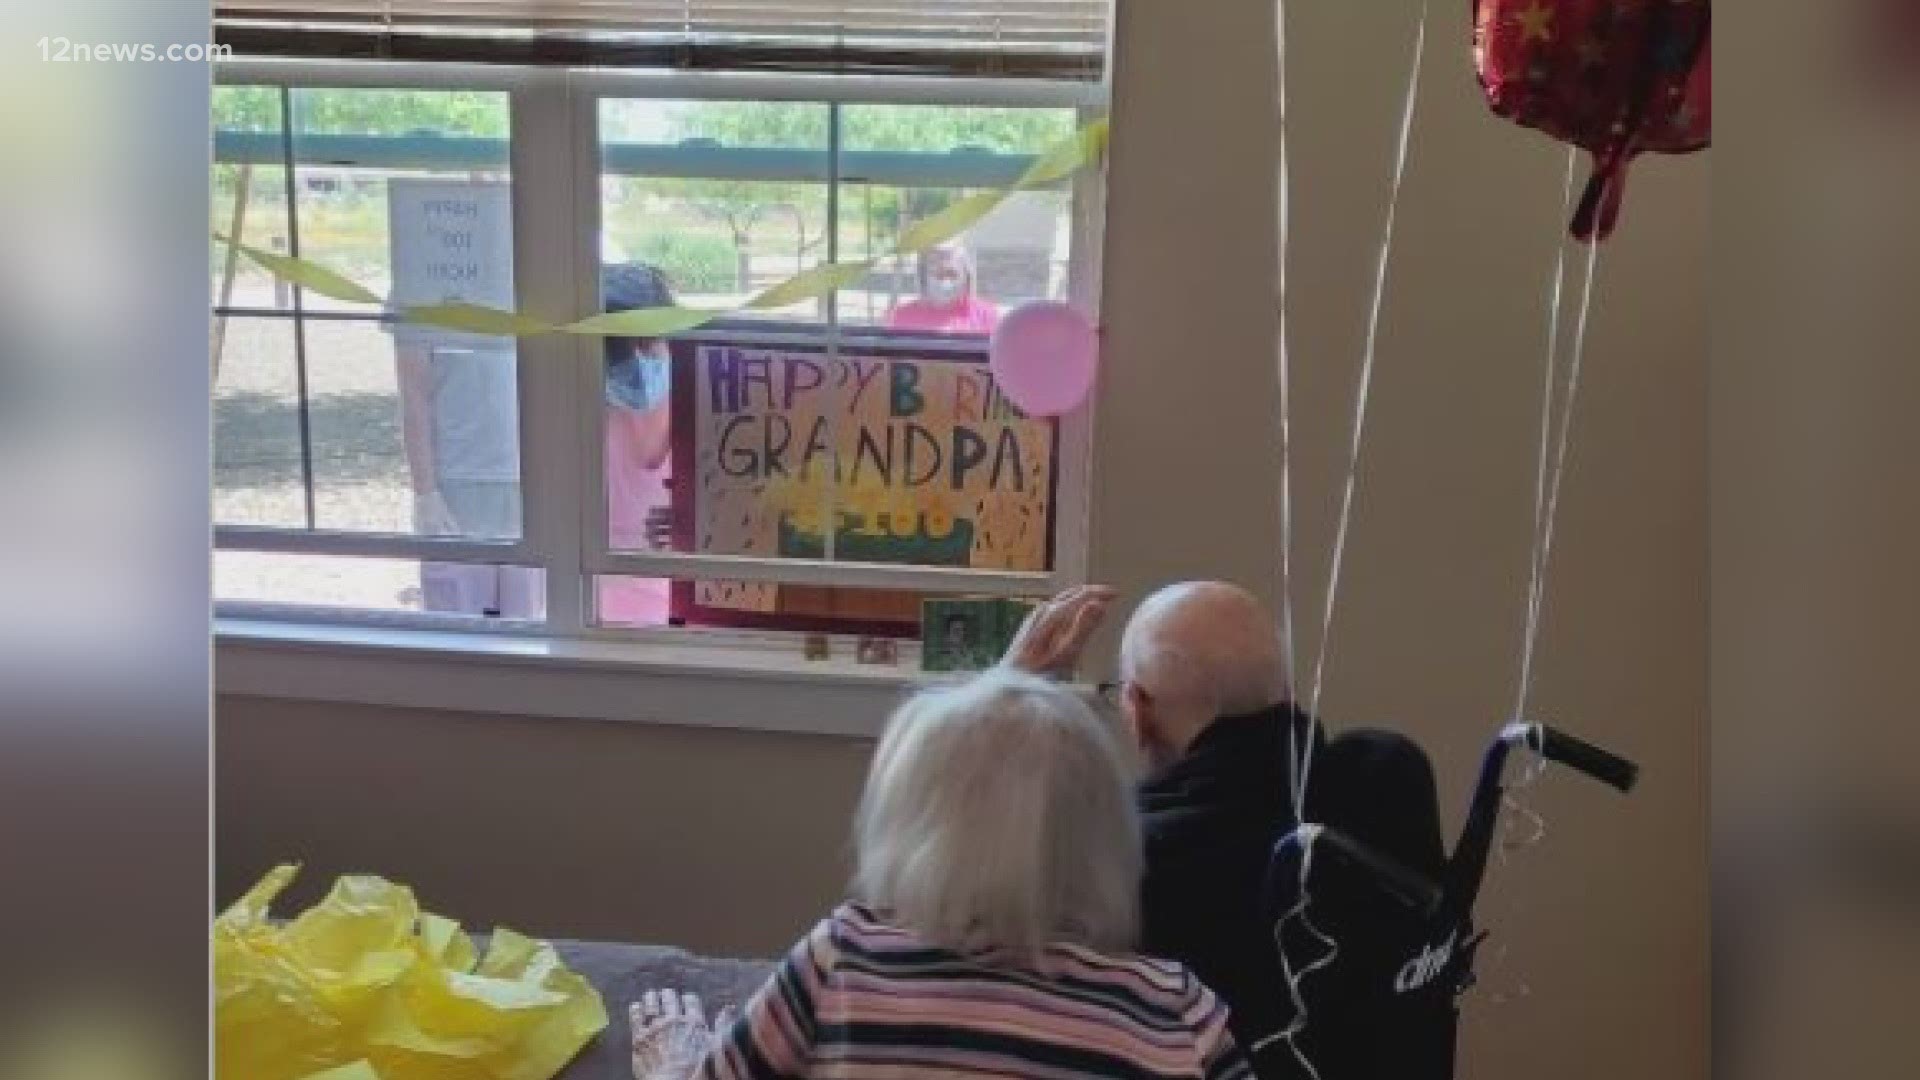 Morning Star at Arrowhead wanted to share this special celebration for two of their residents that both turned  100 years old on the same day!